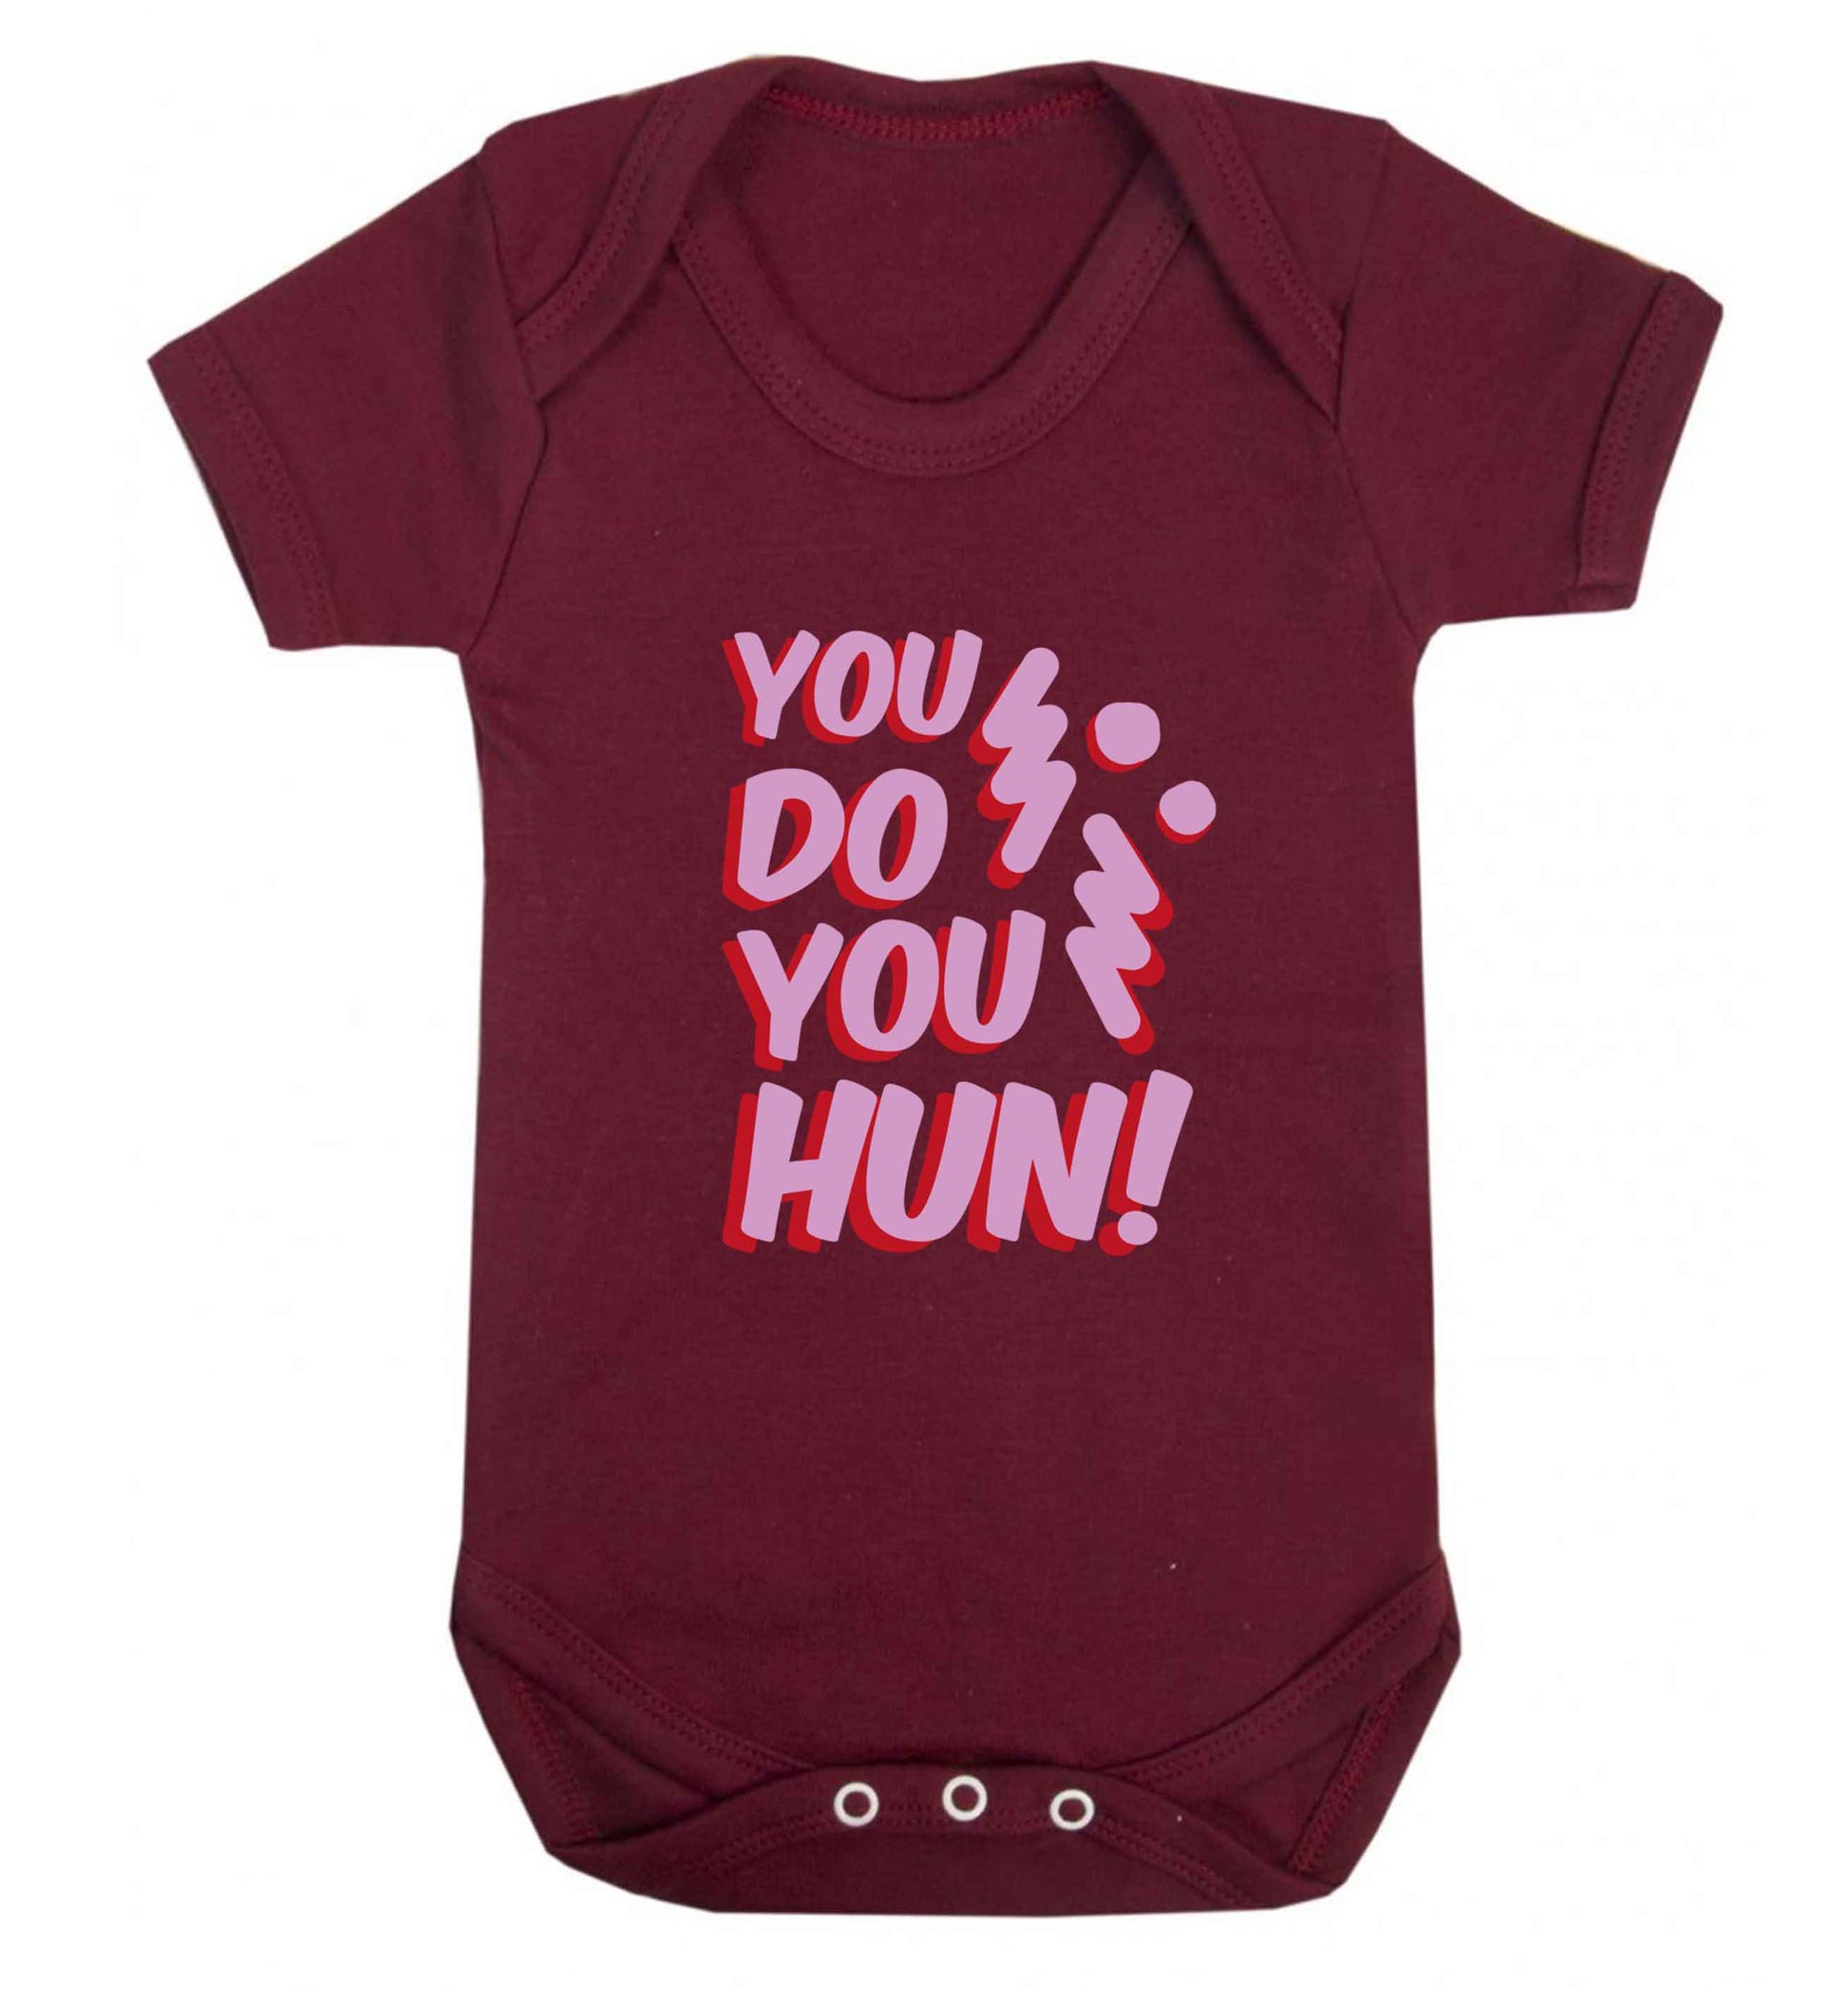 You do you hun baby vest maroon 18-24 months